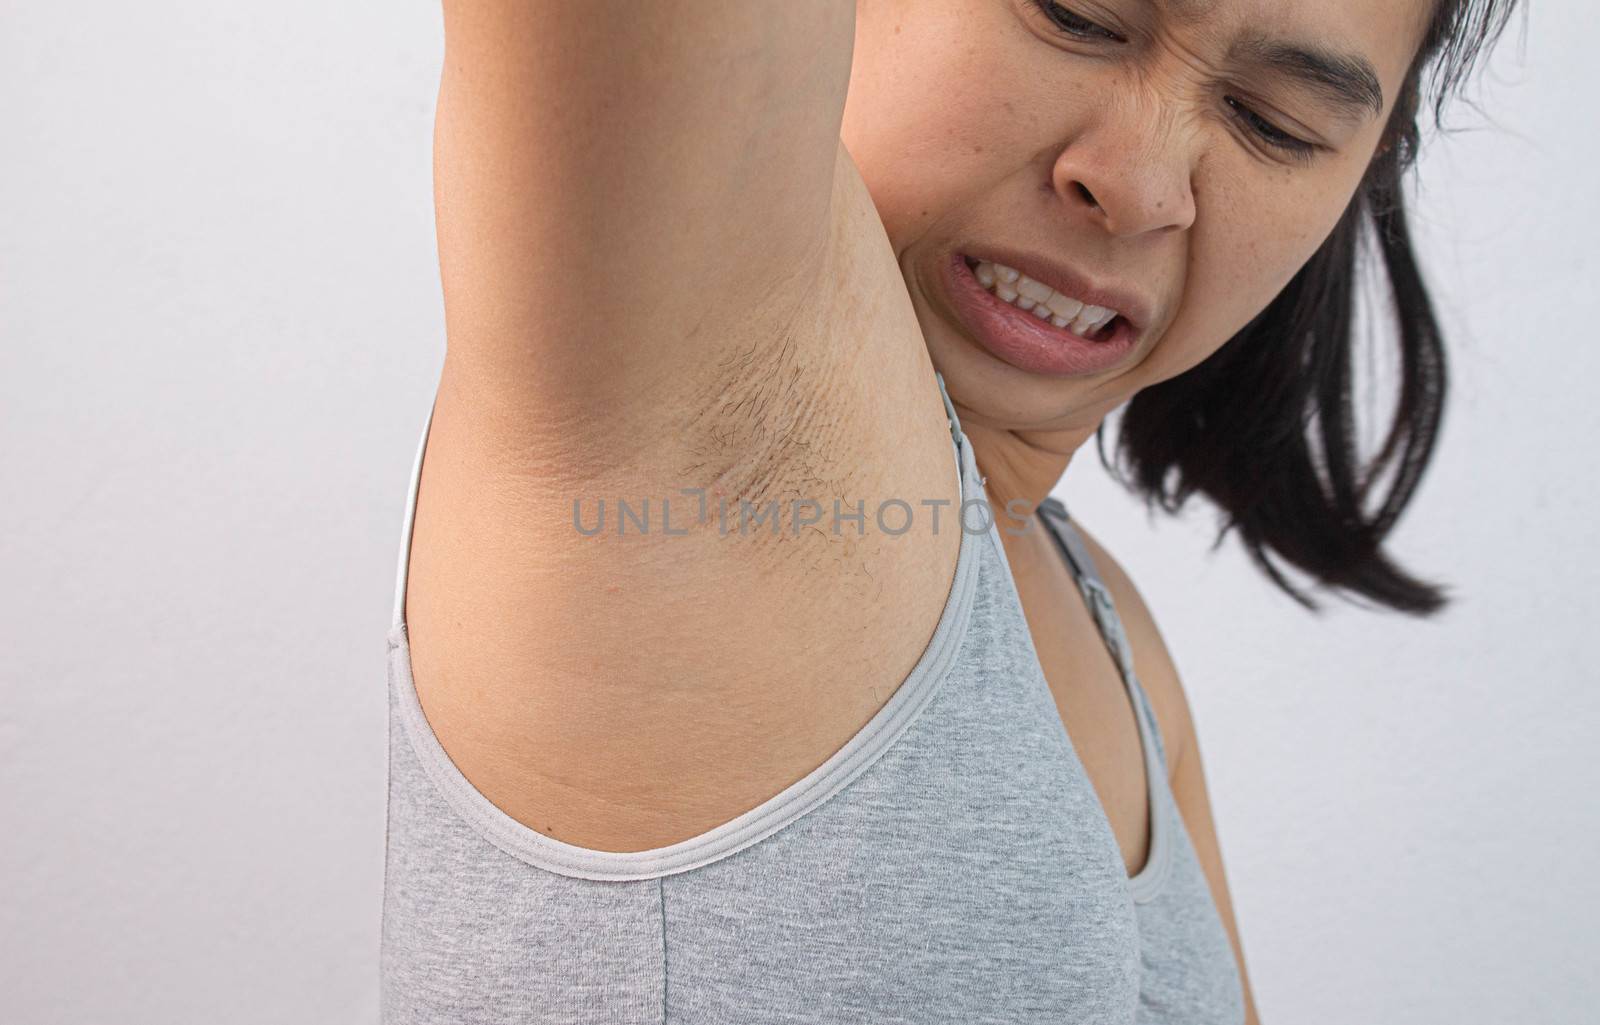 Close up of young woman showing her unshaved armpit and offensive face isolated on grey background. Concept of Health care for skin and beauty.